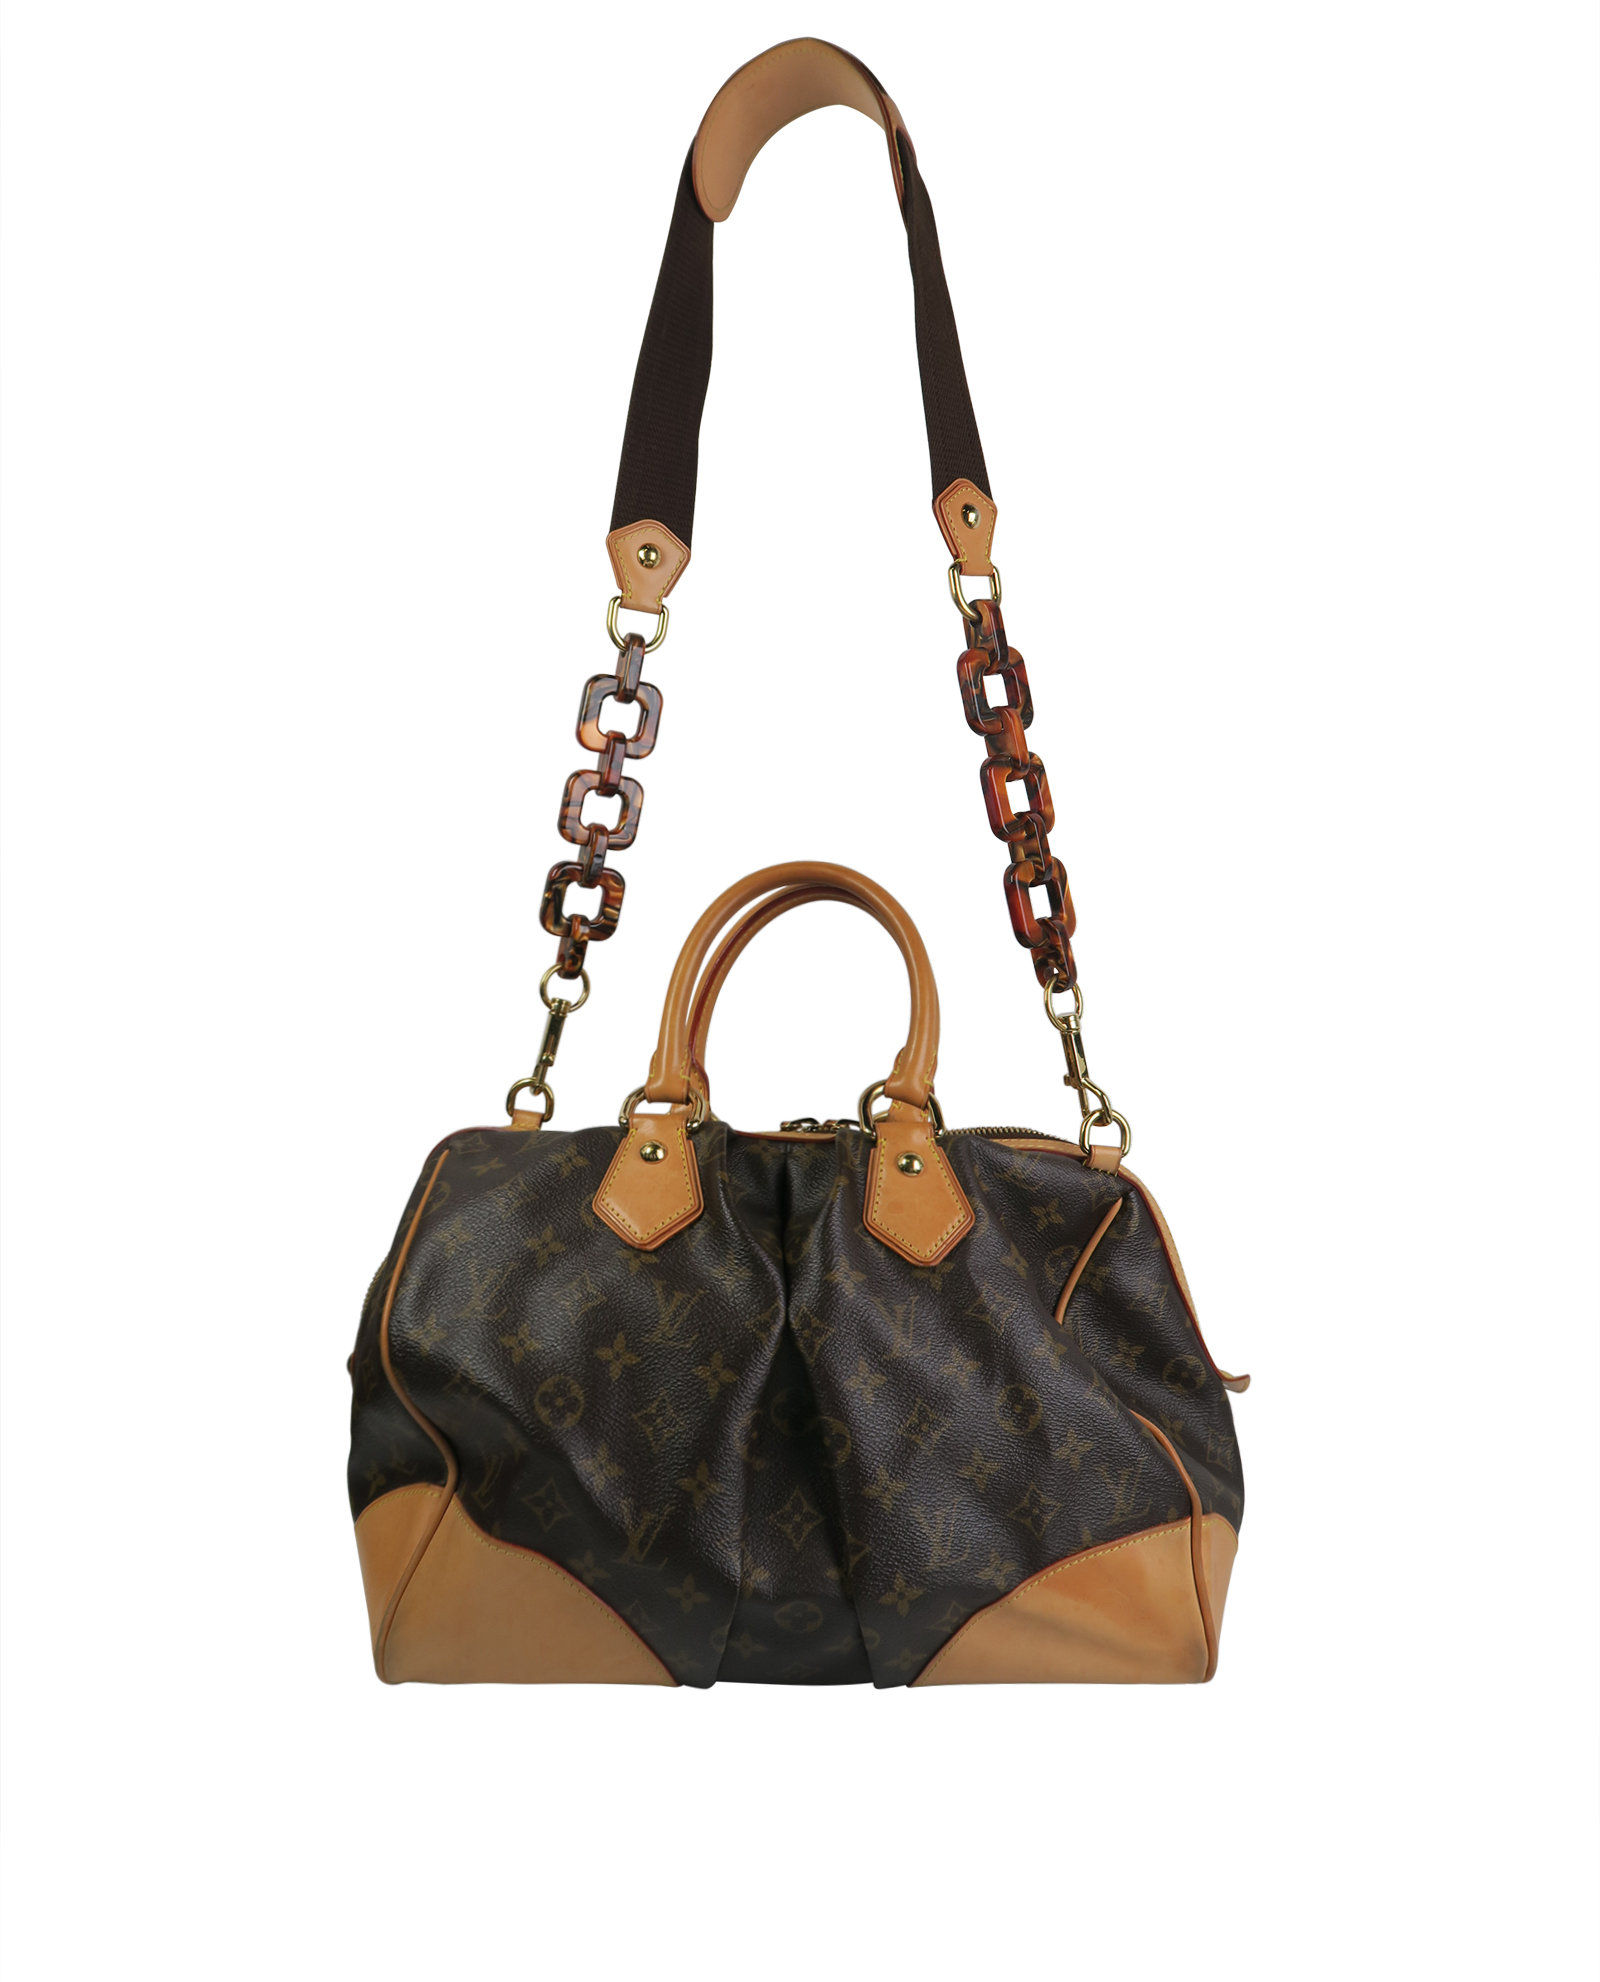 Louis Vuitton - Authenticated Stephen Sprouse Boston Handbag - Leather Brown for Women, Very Good Condition